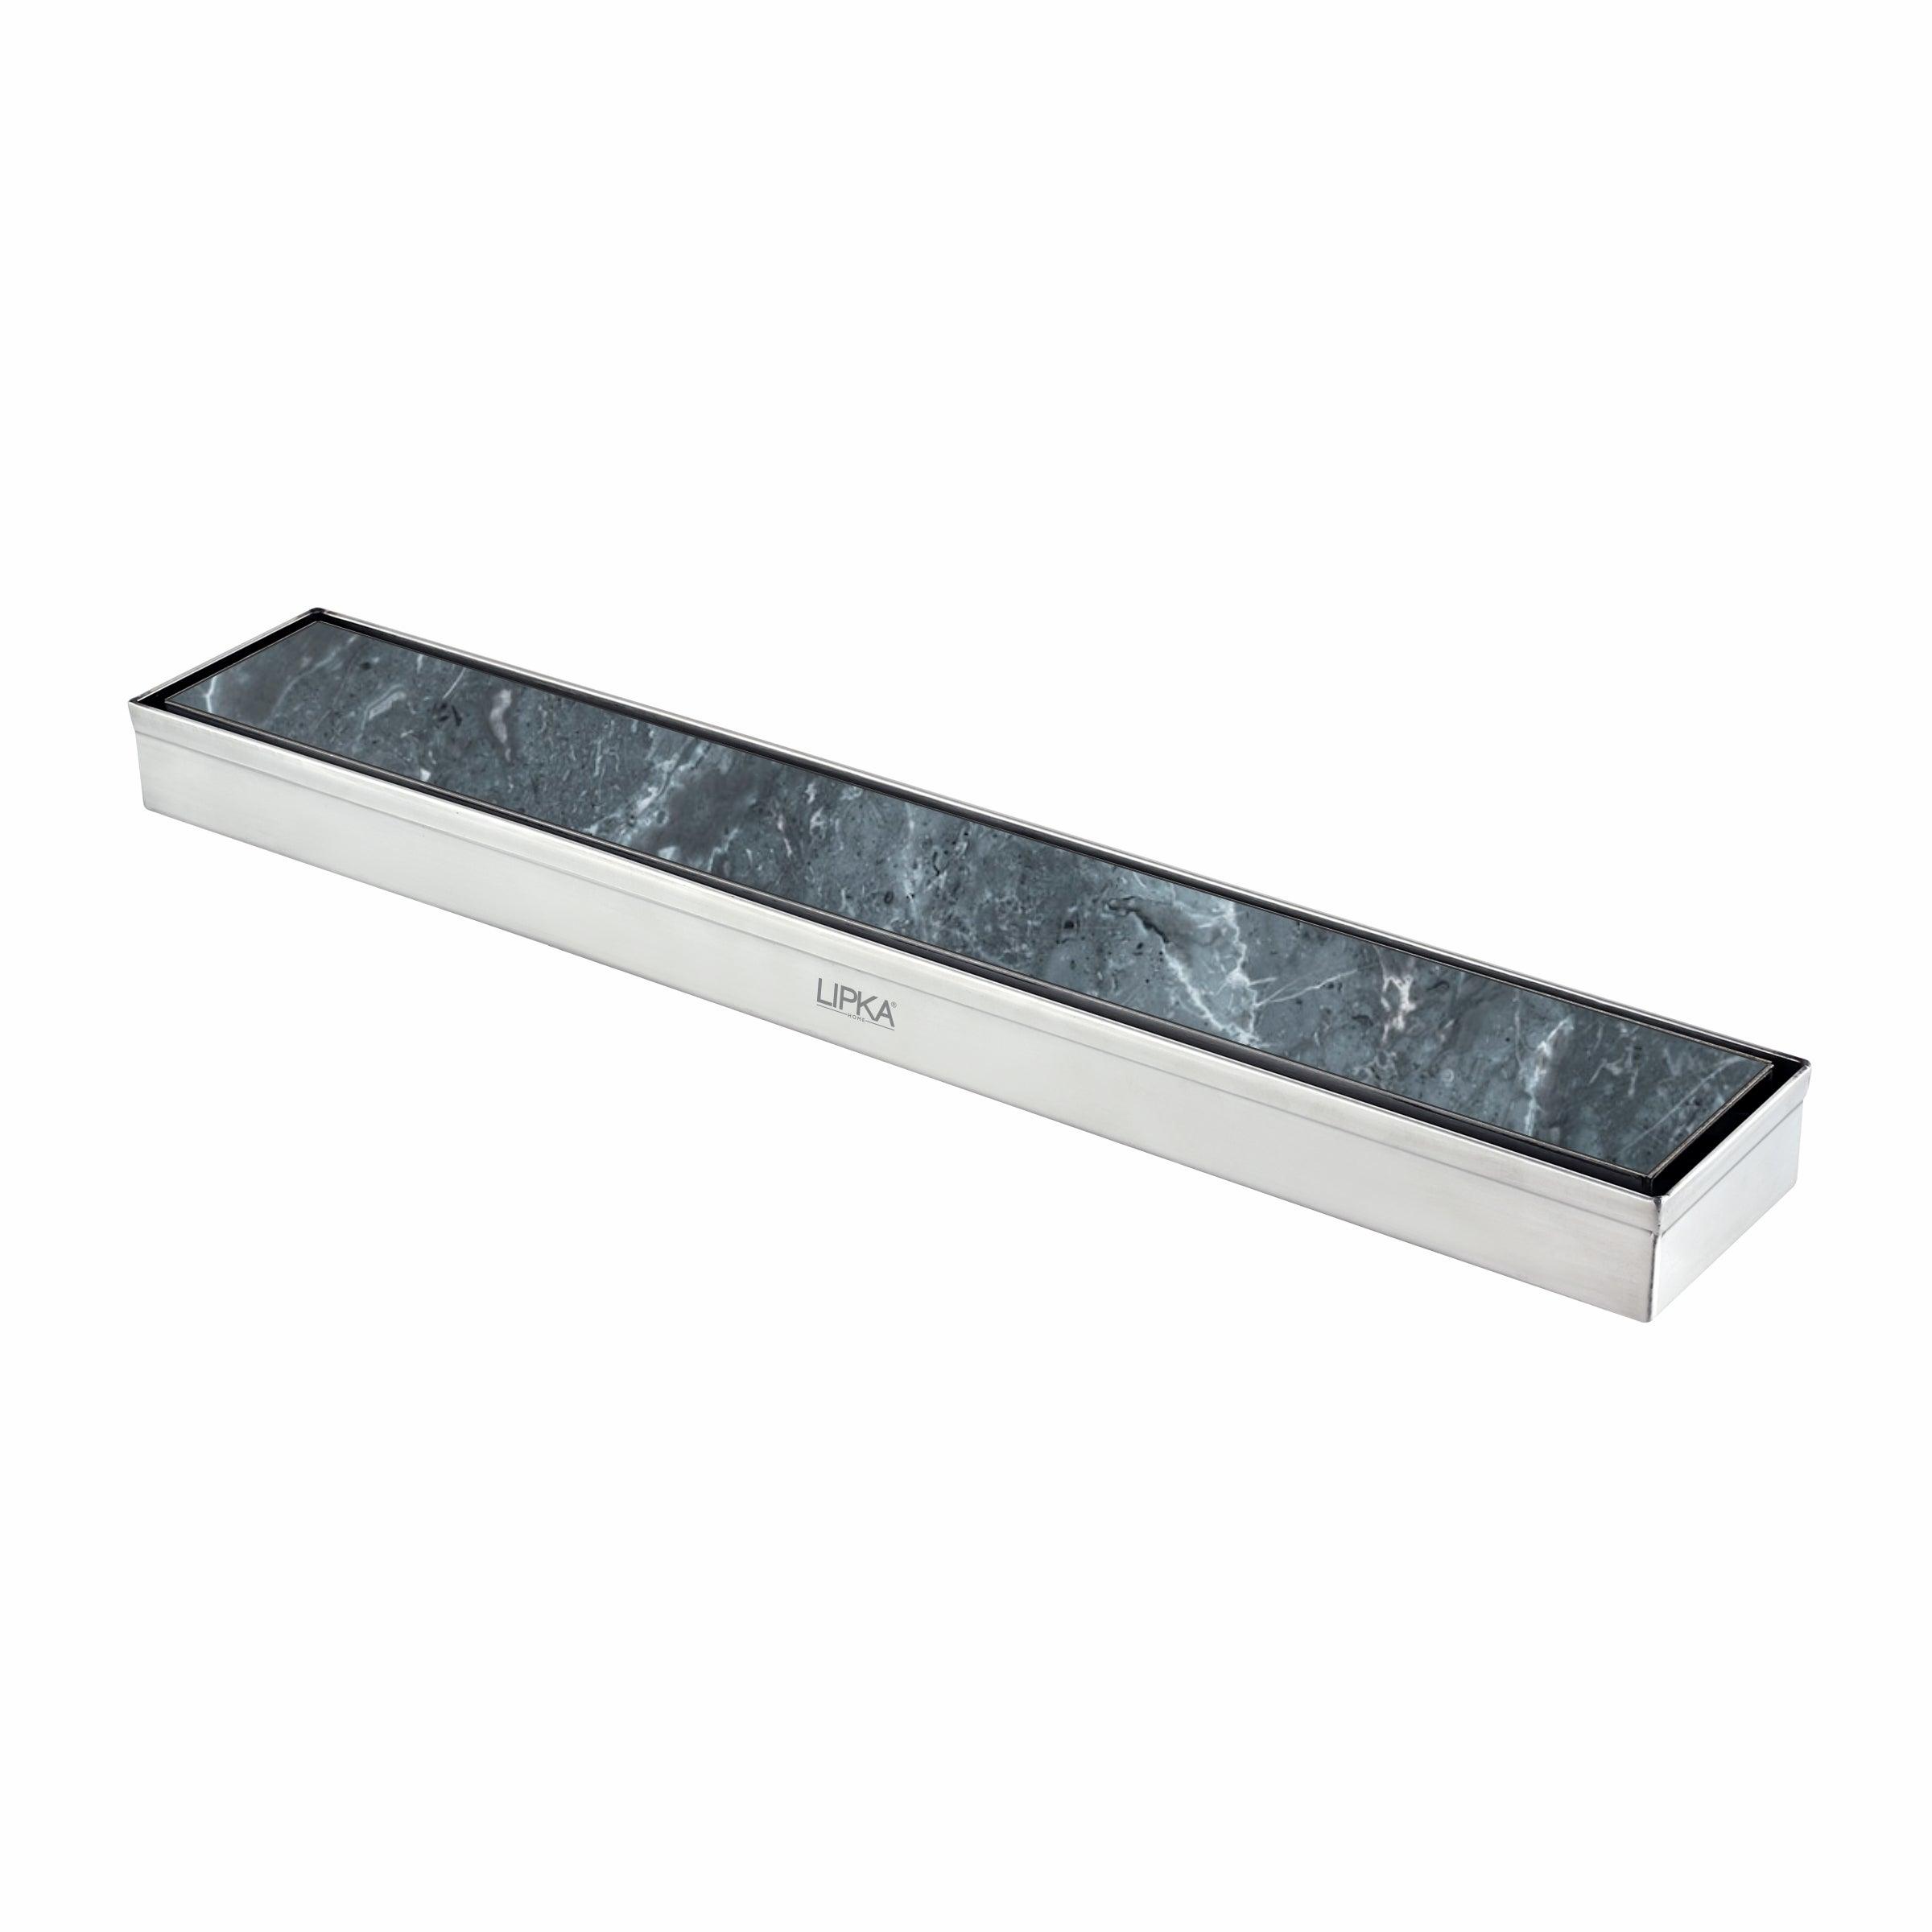 Tile Insert Shower Drain Channel (18 x 2 Inches) 